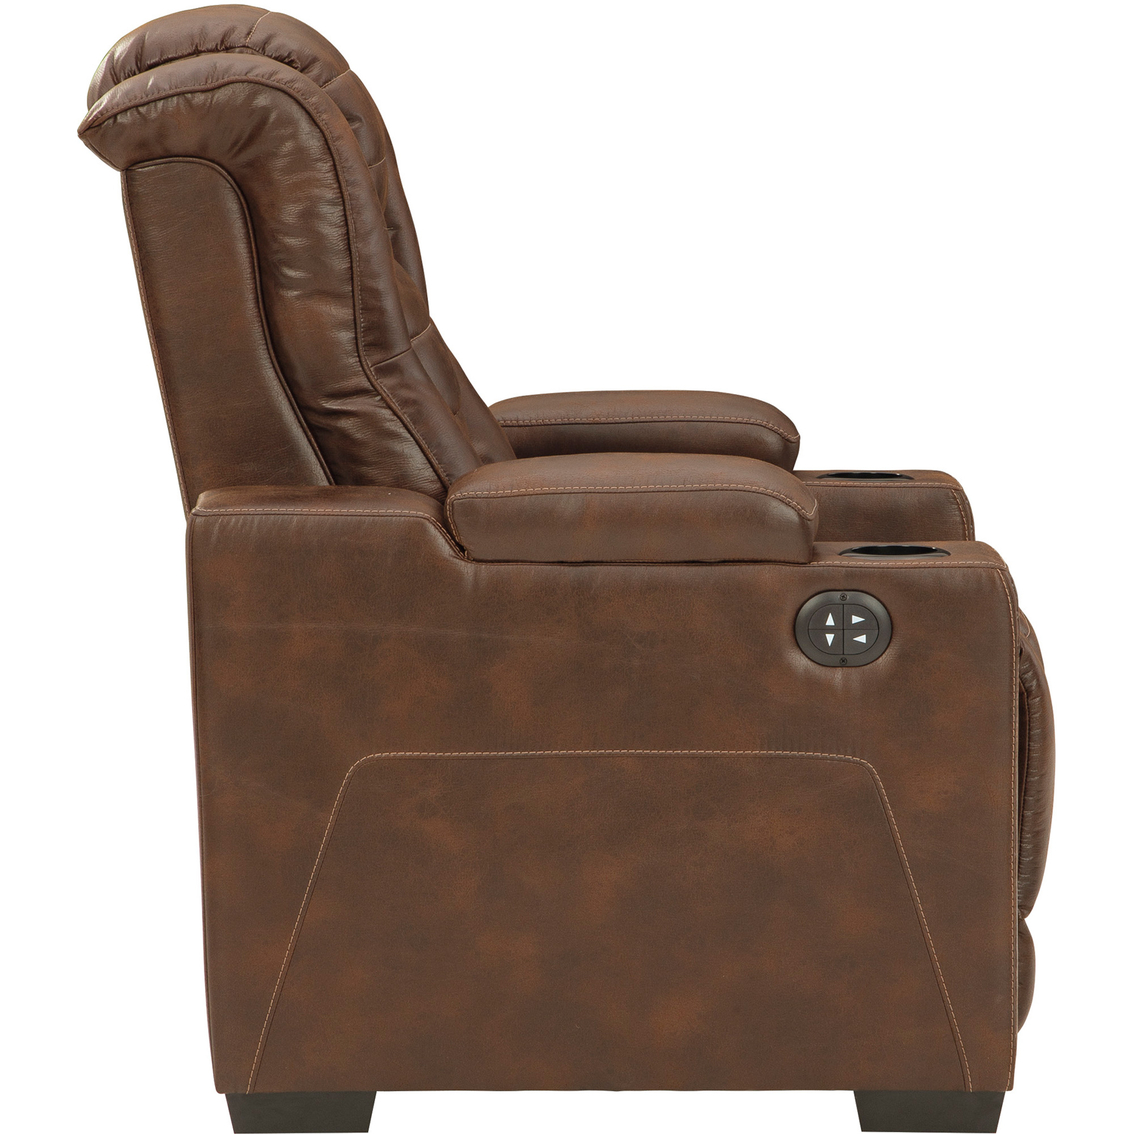 Signature Design by Ashley Owner's Box Power Recliner with Adjustable Headrest - Image 5 of 10